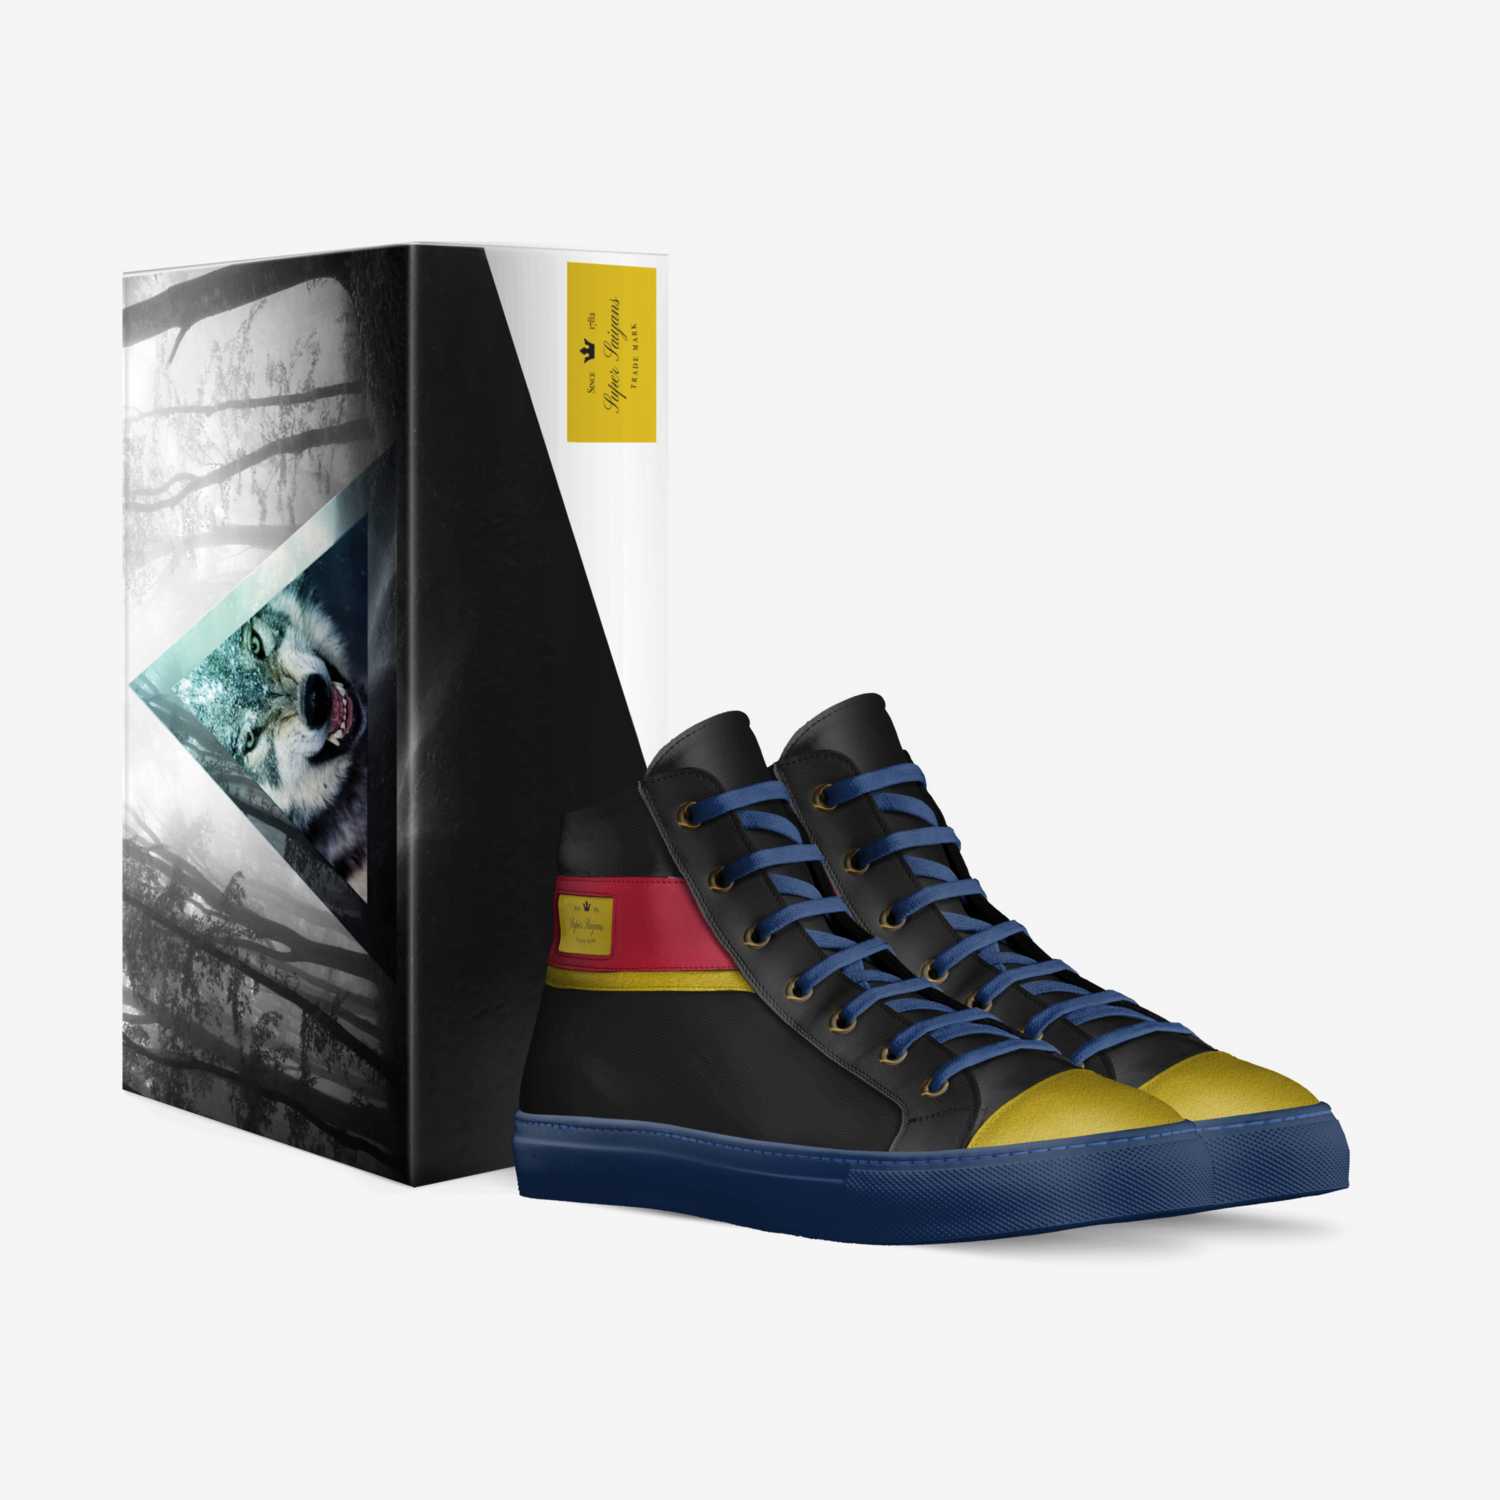 Super Saiyans custom made in Italy shoes by Jamie Shirley | Box view